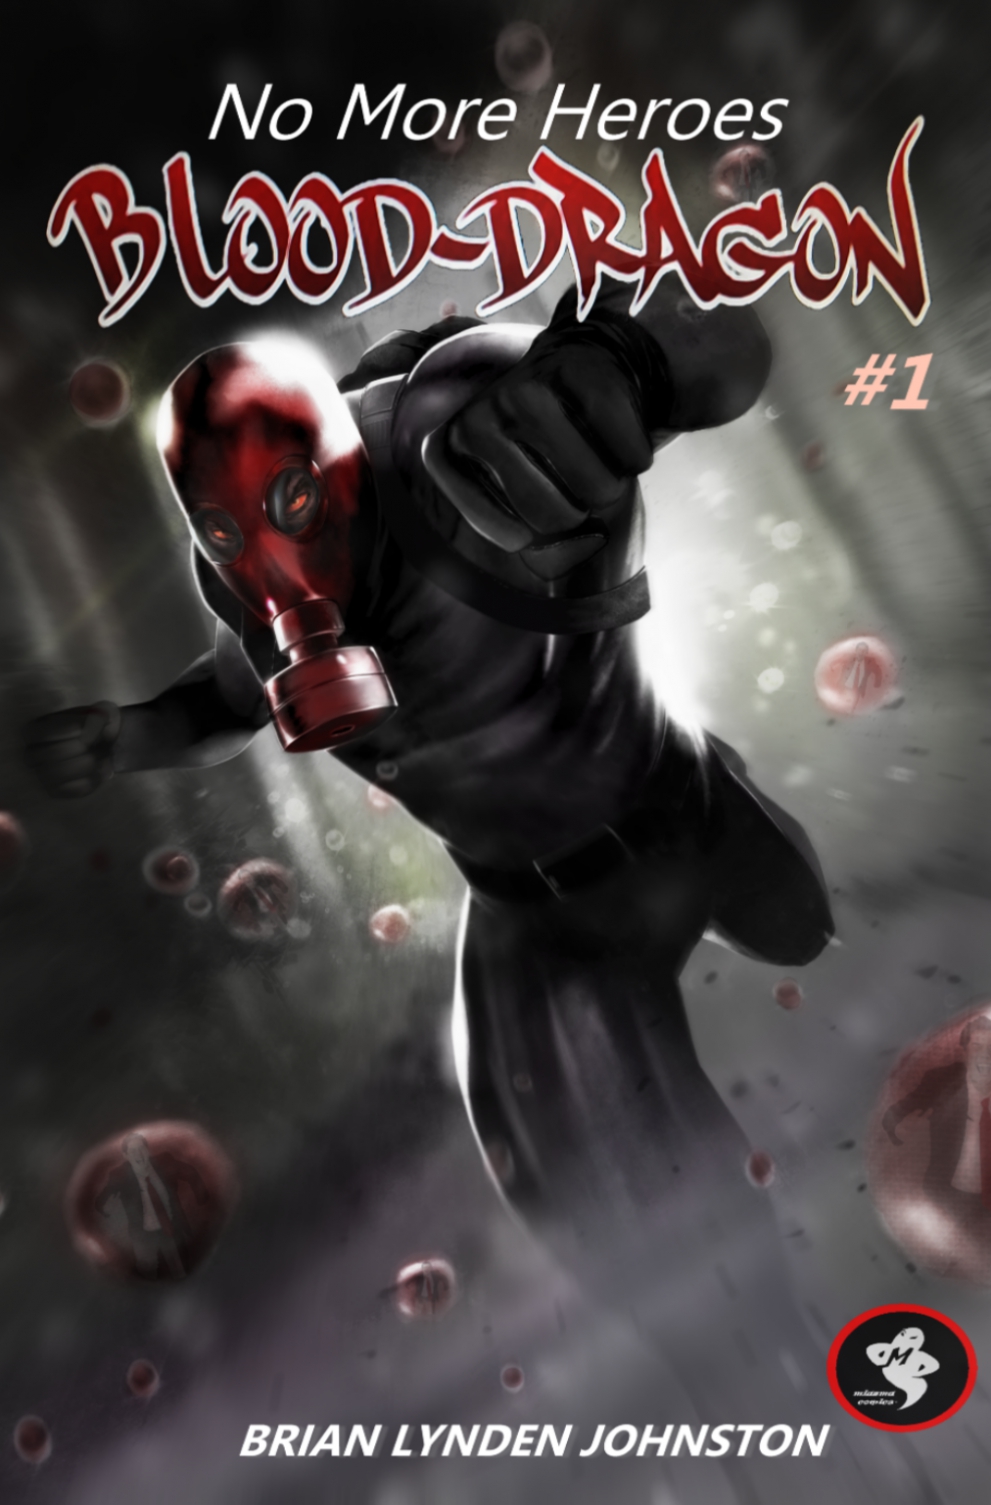 Blood-Dragon #1 - Cover